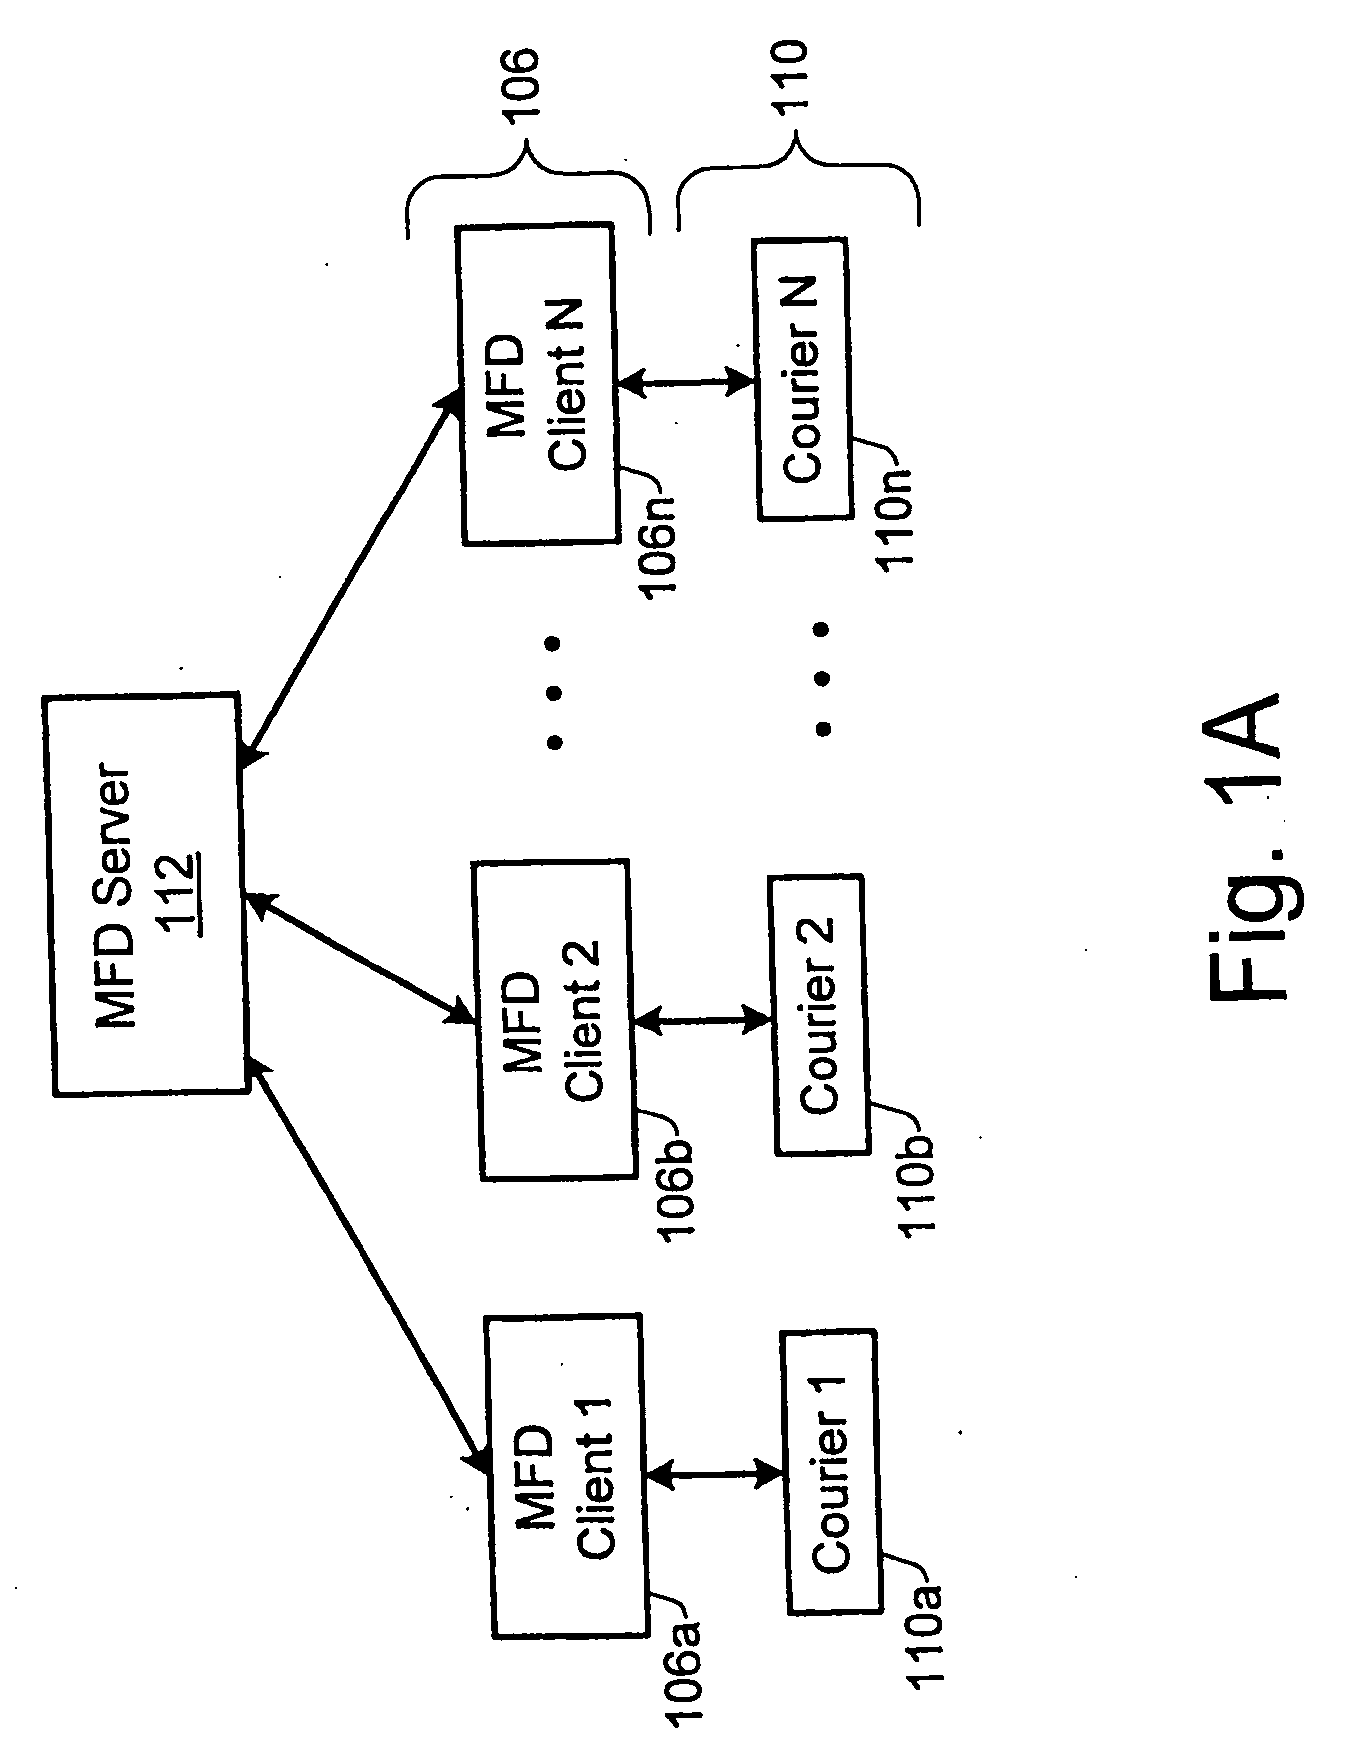 Techniques for processing customer service transactions at customer site using mobile computing device